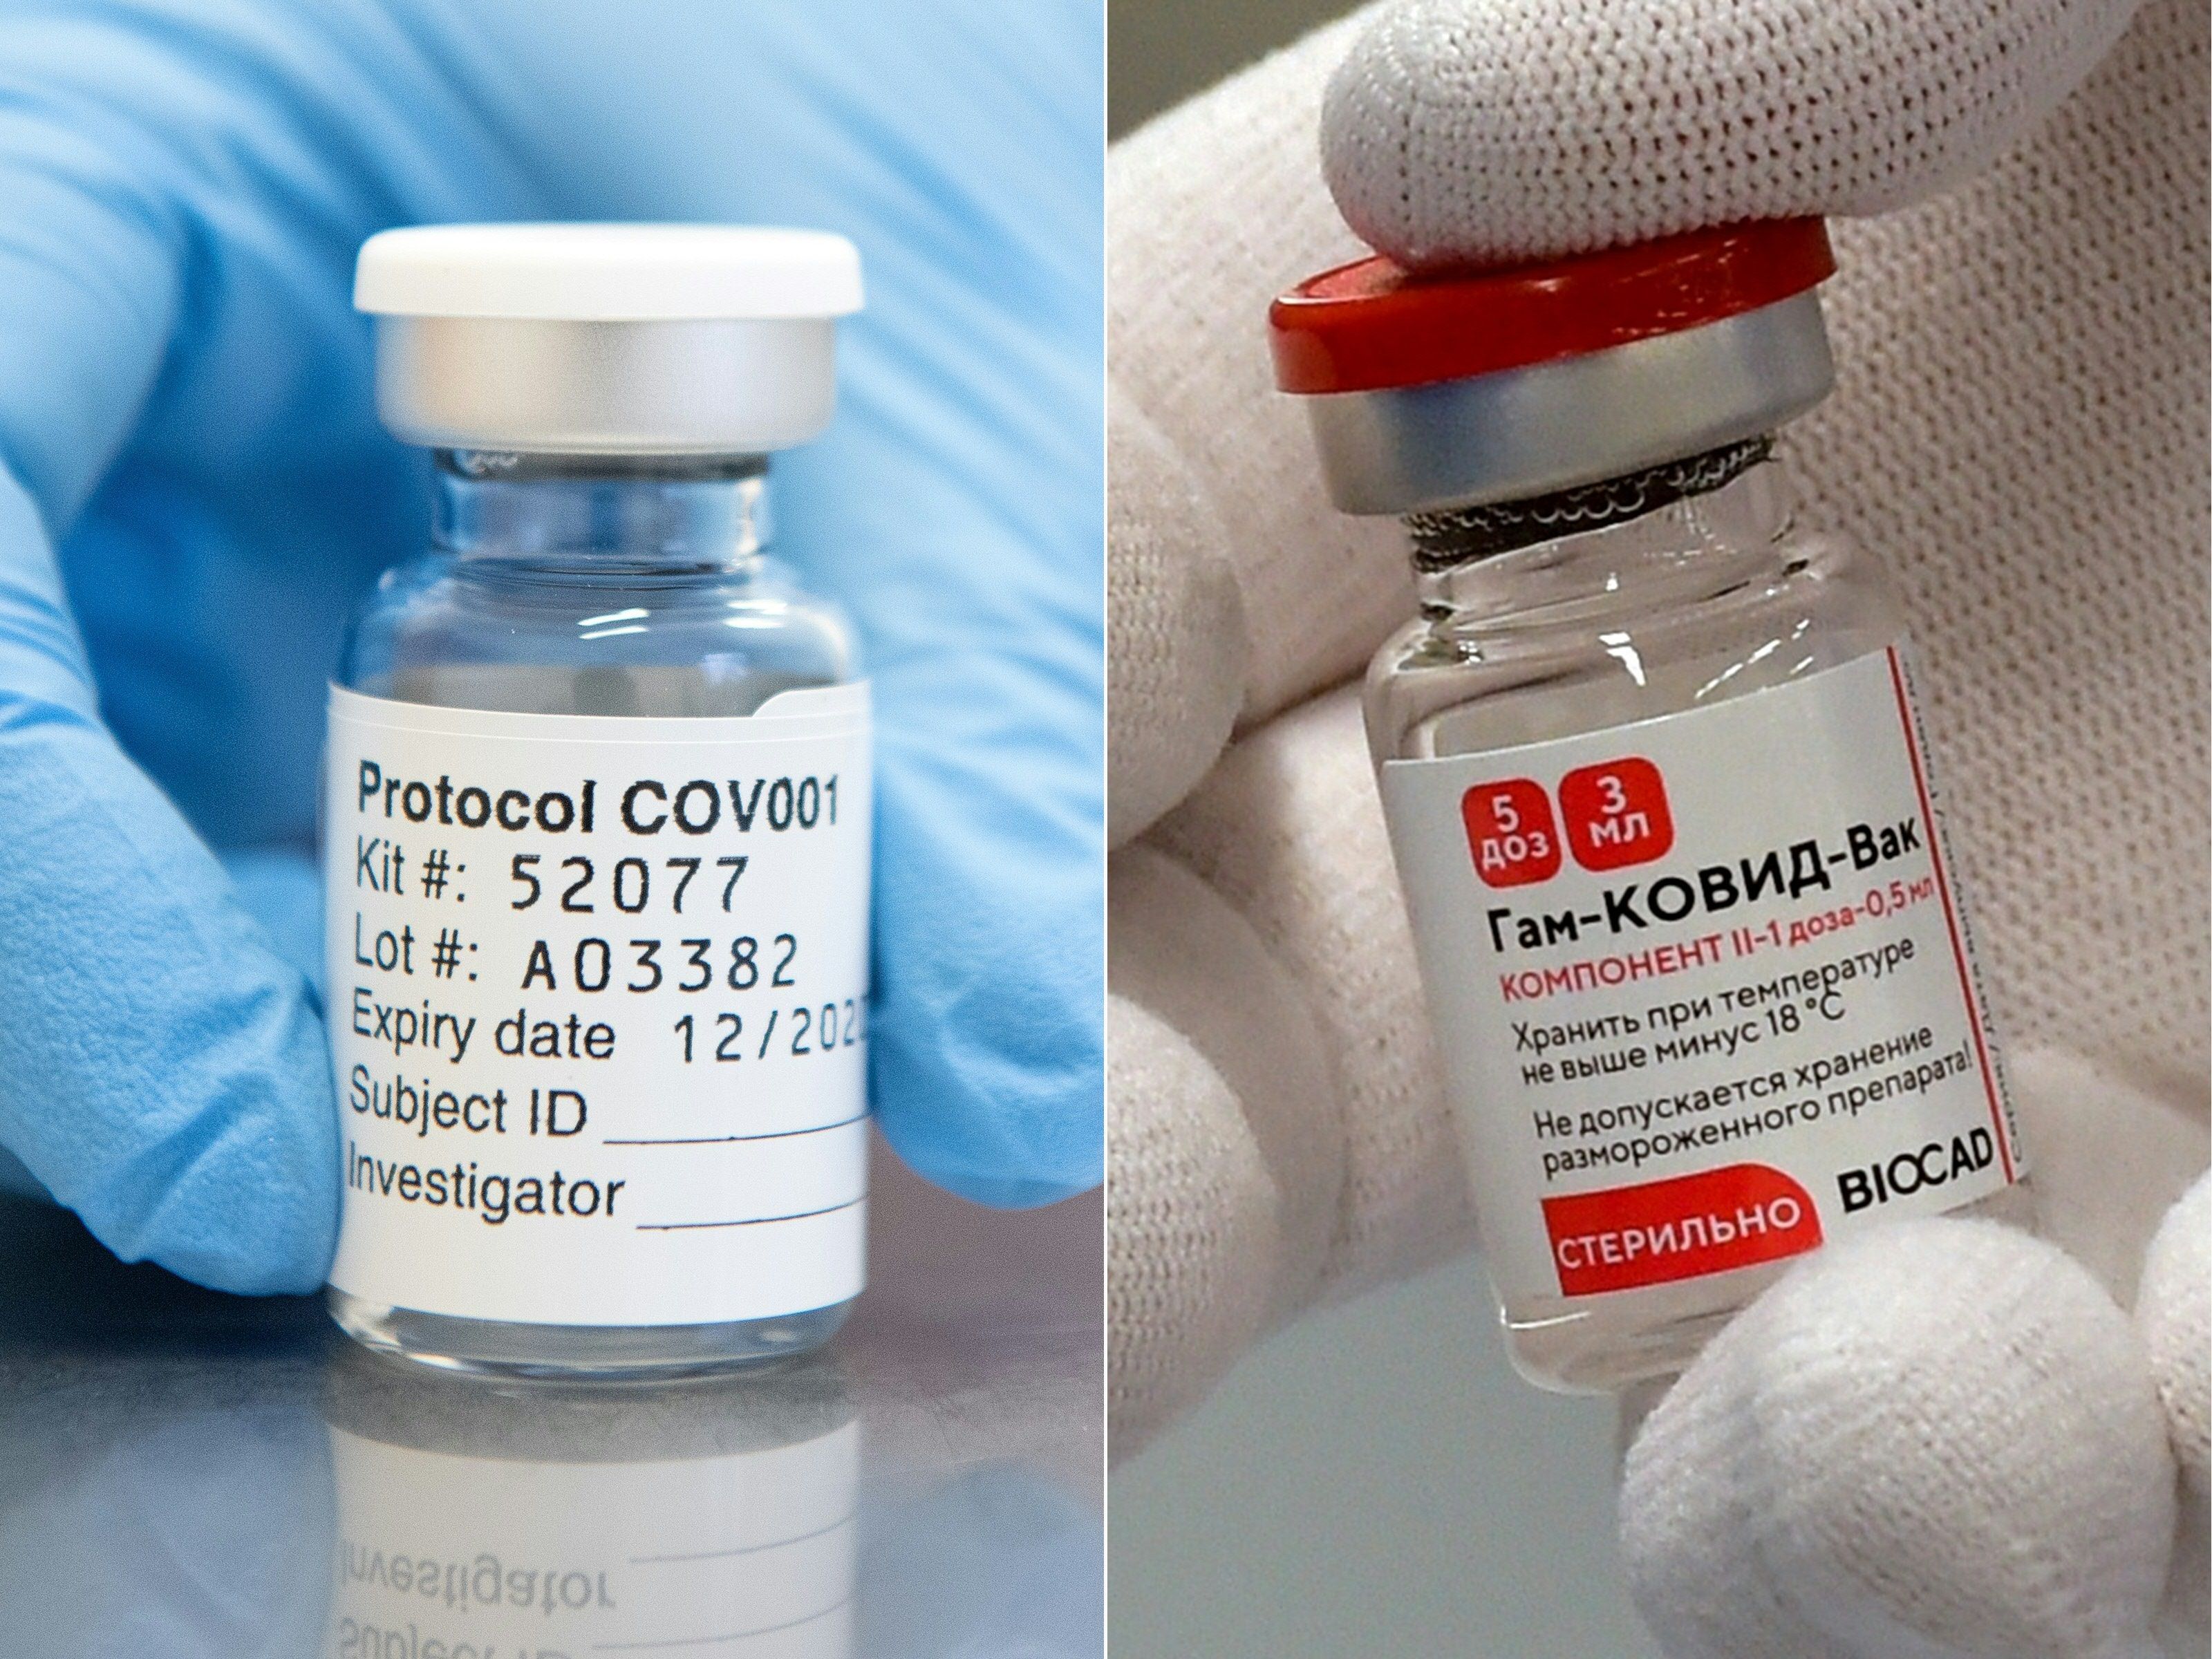 How did Russia get hold of the COVID-19 vaccine blueprint?